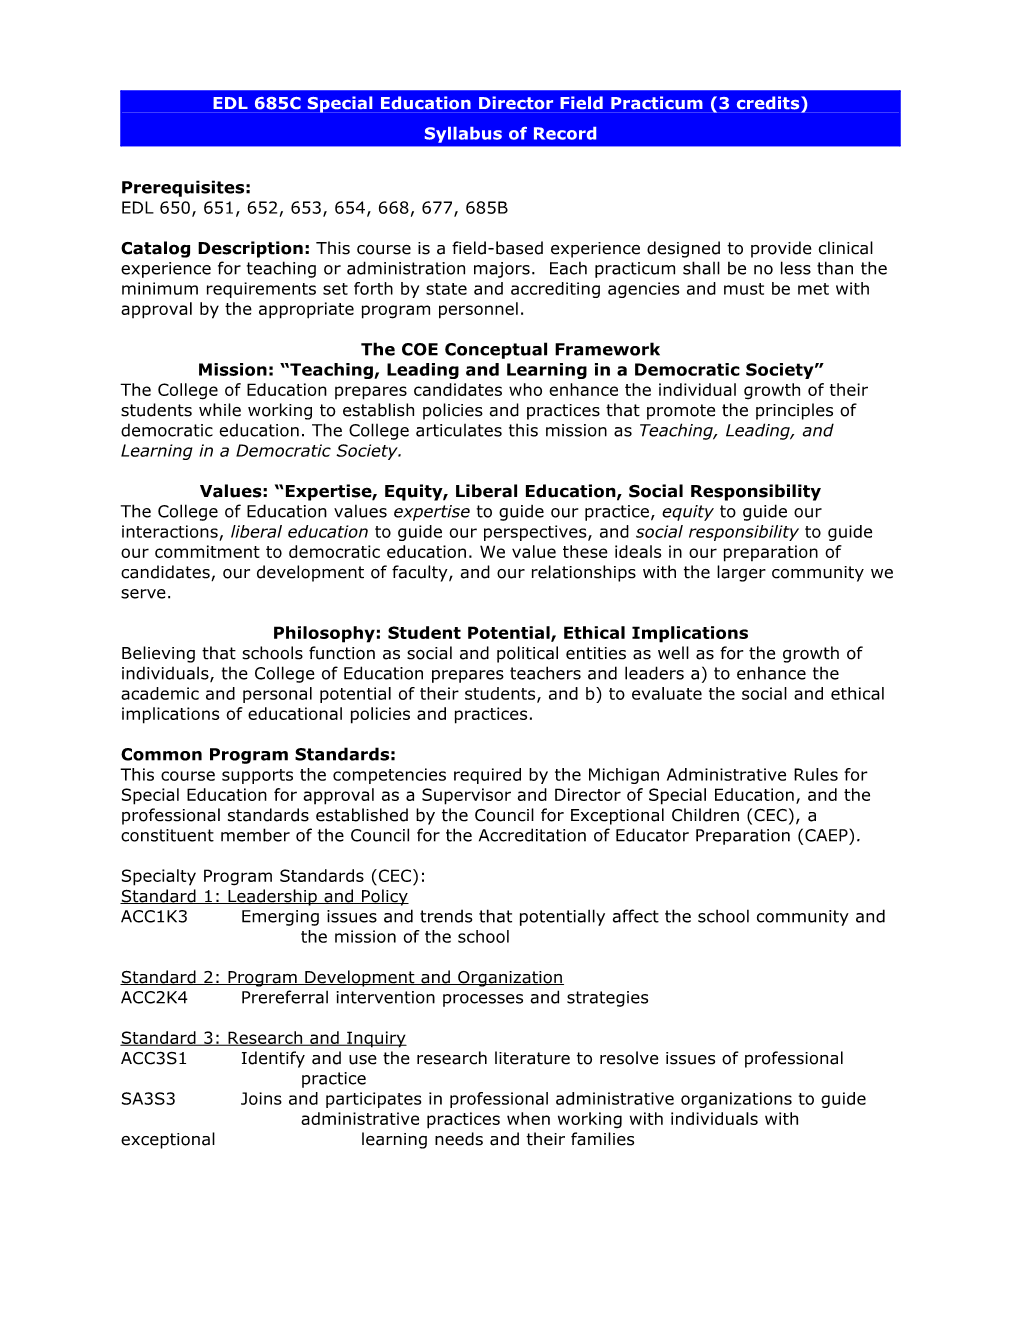 EDS 685 Syllabus of Record: a Practicum/Field for Special Education Administration